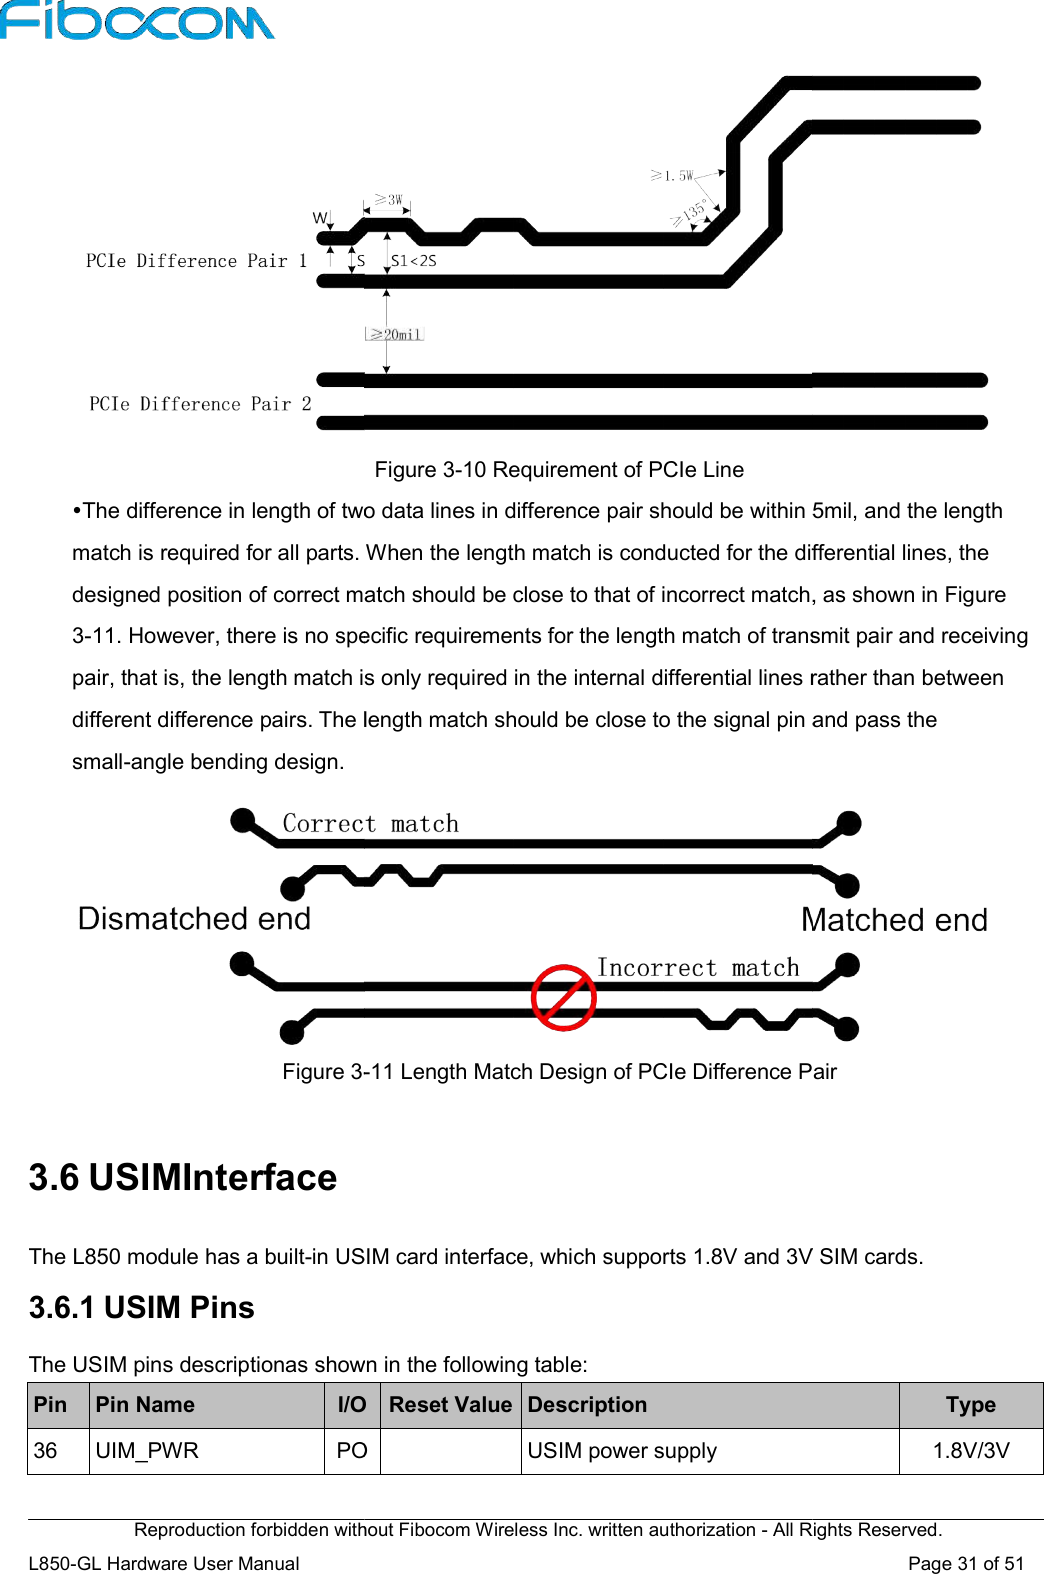 Reproduction forbidden without Fibocom Wireless IL850-GL Hardware User Manual    The difference in length of two data lines in difference pair should be within match is required for all parts. When the length match is conducted for the differential lines, the designed position of correct match should be close to that of incorrect match, as shown in Figure3-11. However, there is no specific rpair, that is, the length match is only required in the internal differential lines rather than between different difference pairs. The length match should be close to the signal pin and pass small-angle bending design.  Figure 3-  3.6 USIMInterface  The L850 module has a built-in USIM card interface, which supports 1.8V and 3V SIM cards.3.6.1 USIM Pins The USIM pins descriptionas shown in the Pin  Pin Name I/O36  UIM_PWR POReproduction forbidden without Fibocom Wireless Inc. written authorization - All Rights Reserved.Figure 3-10 Requirement of PCIe Line The difference in length of two data lines in difference pair should be within 5mil, and the length match is required for all parts. When the length match is conducted for the differential lines, the designed position of correct match should be close to that of incorrect match, as shown in Figure11. However, there is no specific requirements for the length match of transmit pair and receiving pair, that is, the length match is only required in the internal differential lines rather than between different difference pairs. The length match should be close to the signal pin and pass -11 Length Match Design of PCIe Difference Pairin USIM card interface, which supports 1.8V and 3V SIM cards.The USIM pins descriptionas shown in the following table: I/O Reset Value Description PO  USIM power supply All Rights Reserved. Page 31 of 51  5mil, and the length match is required for all parts. When the length match is conducted for the differential lines, the designed position of correct match should be close to that of incorrect match, as shown in Figure equirements for the length match of transmit pair and receiving pair, that is, the length match is only required in the internal differential lines rather than between different difference pairs. The length match should be close to the signal pin and pass the 11 Length Match Design of PCIe Difference Pair in USIM card interface, which supports 1.8V and 3V SIM cards. Type 1.8V/3V 